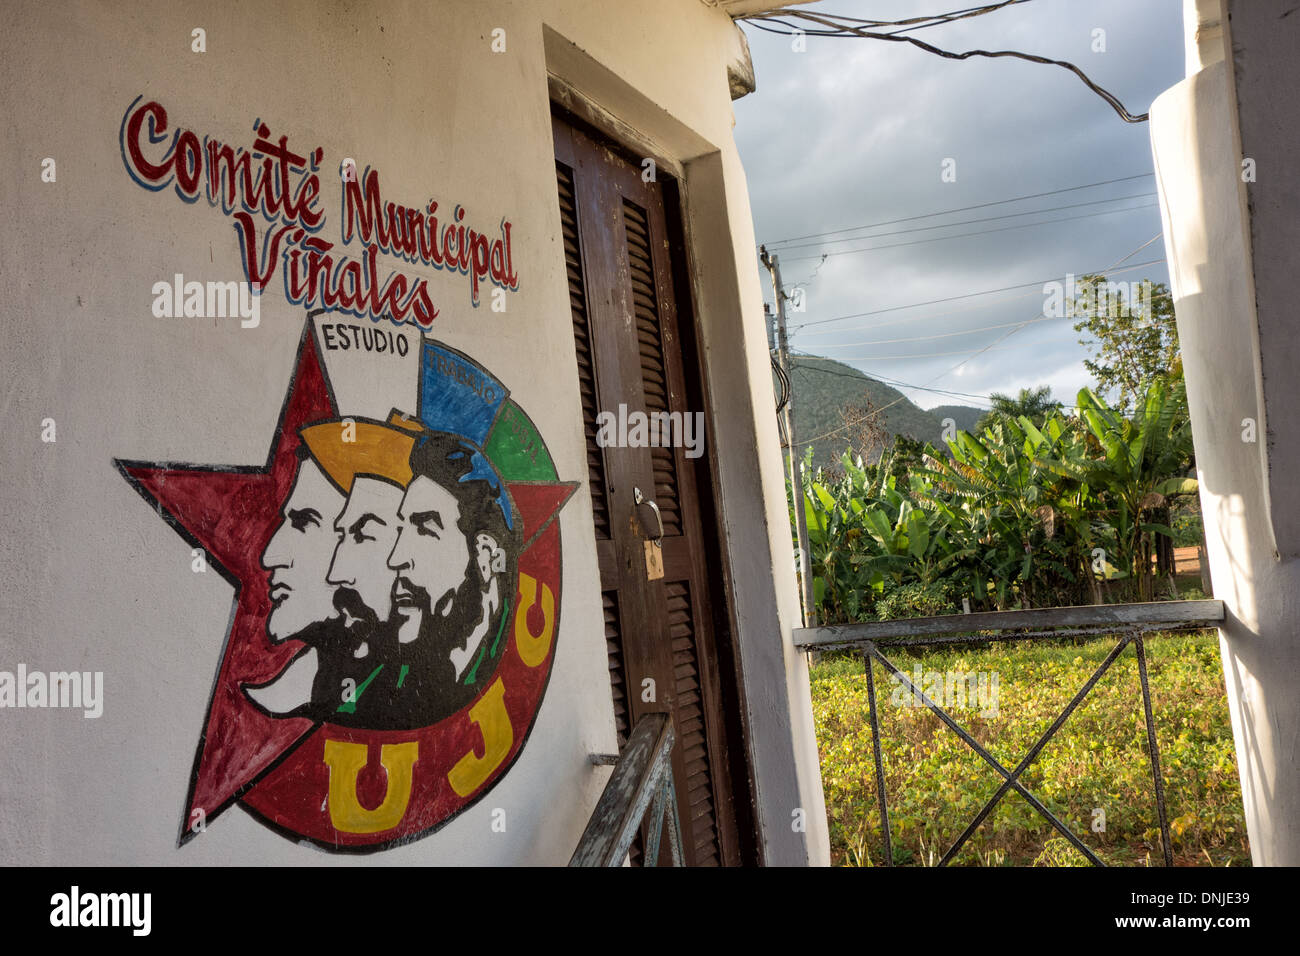 MUNICIPAL COMMITTEE BUILDING IN THE TOWN OF VINALES (UJC, YOUNG COMMUNISTS UNION), VINALES VALLEY, LISTED AS A WORLD HERITAGE SITE BY UNESCO, CUBA, THE CARIBBEAN Stock Photo